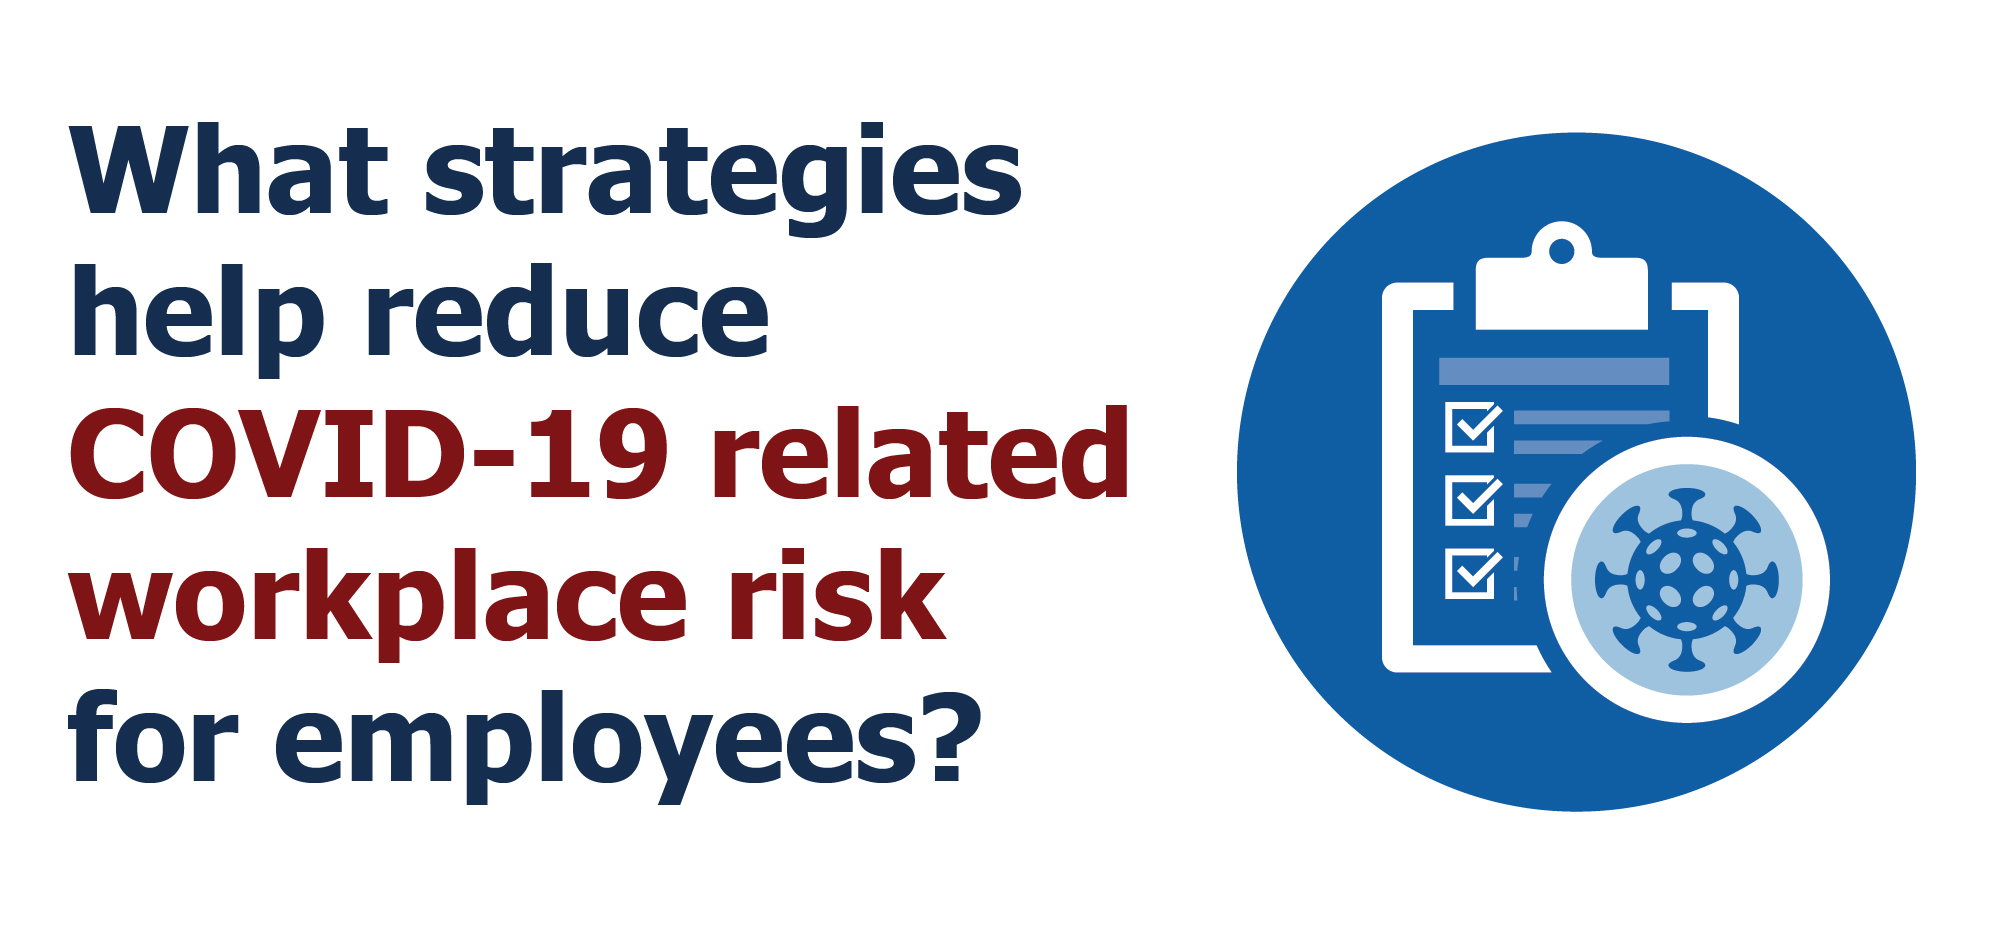 What strategies help reduce COVID-19 related workplace risk for employees?